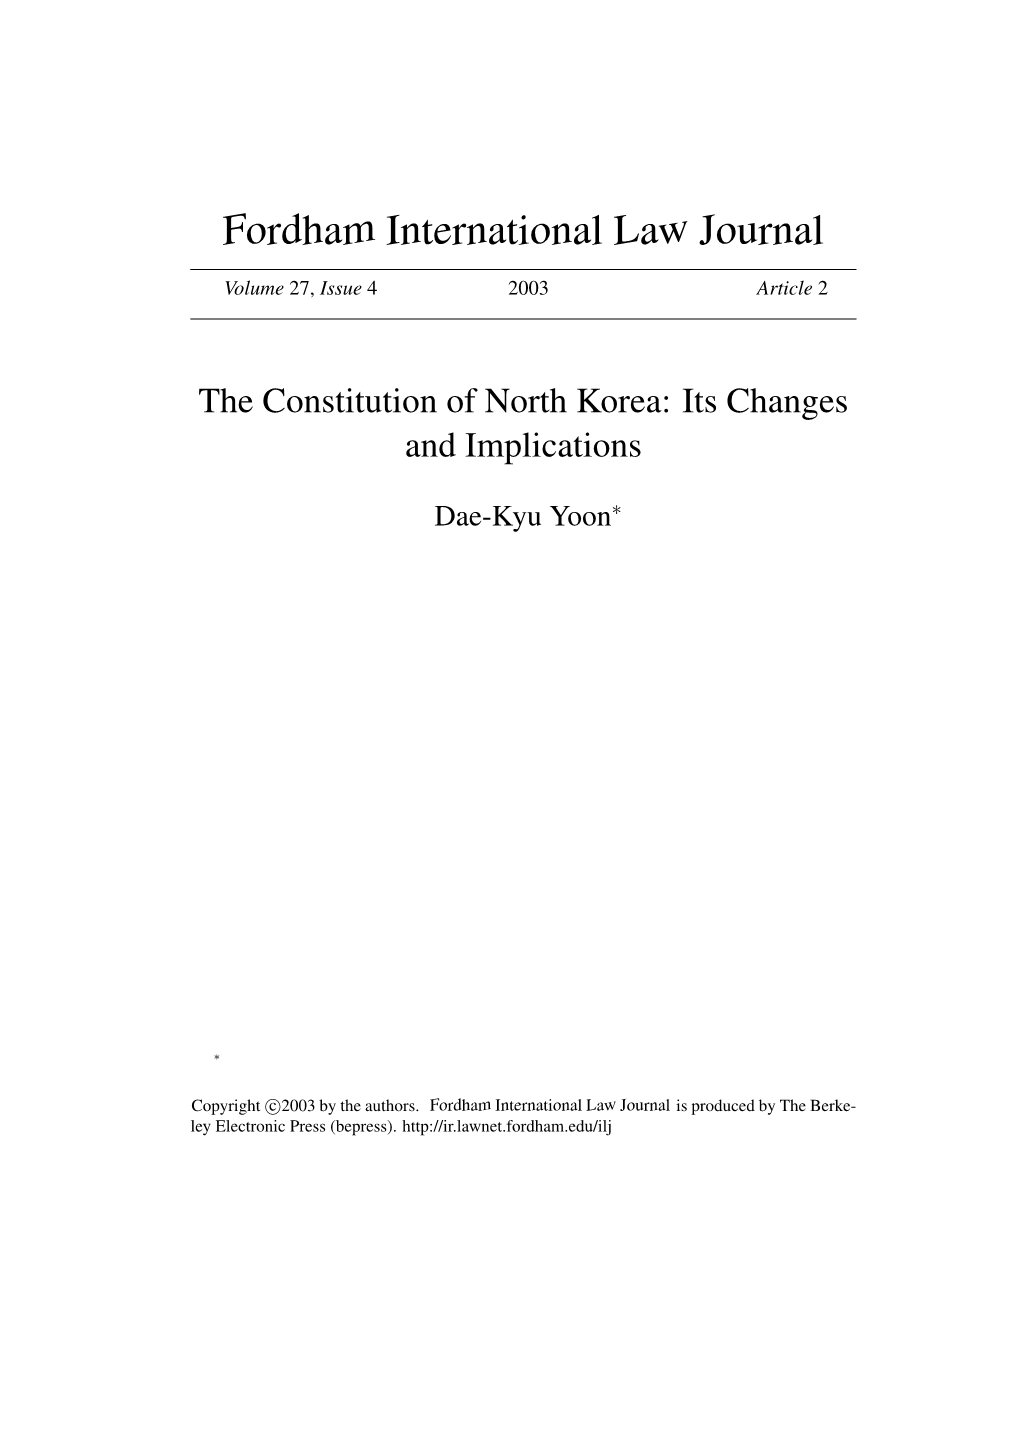 The Constitution of North Korea: Its Changes and Implications